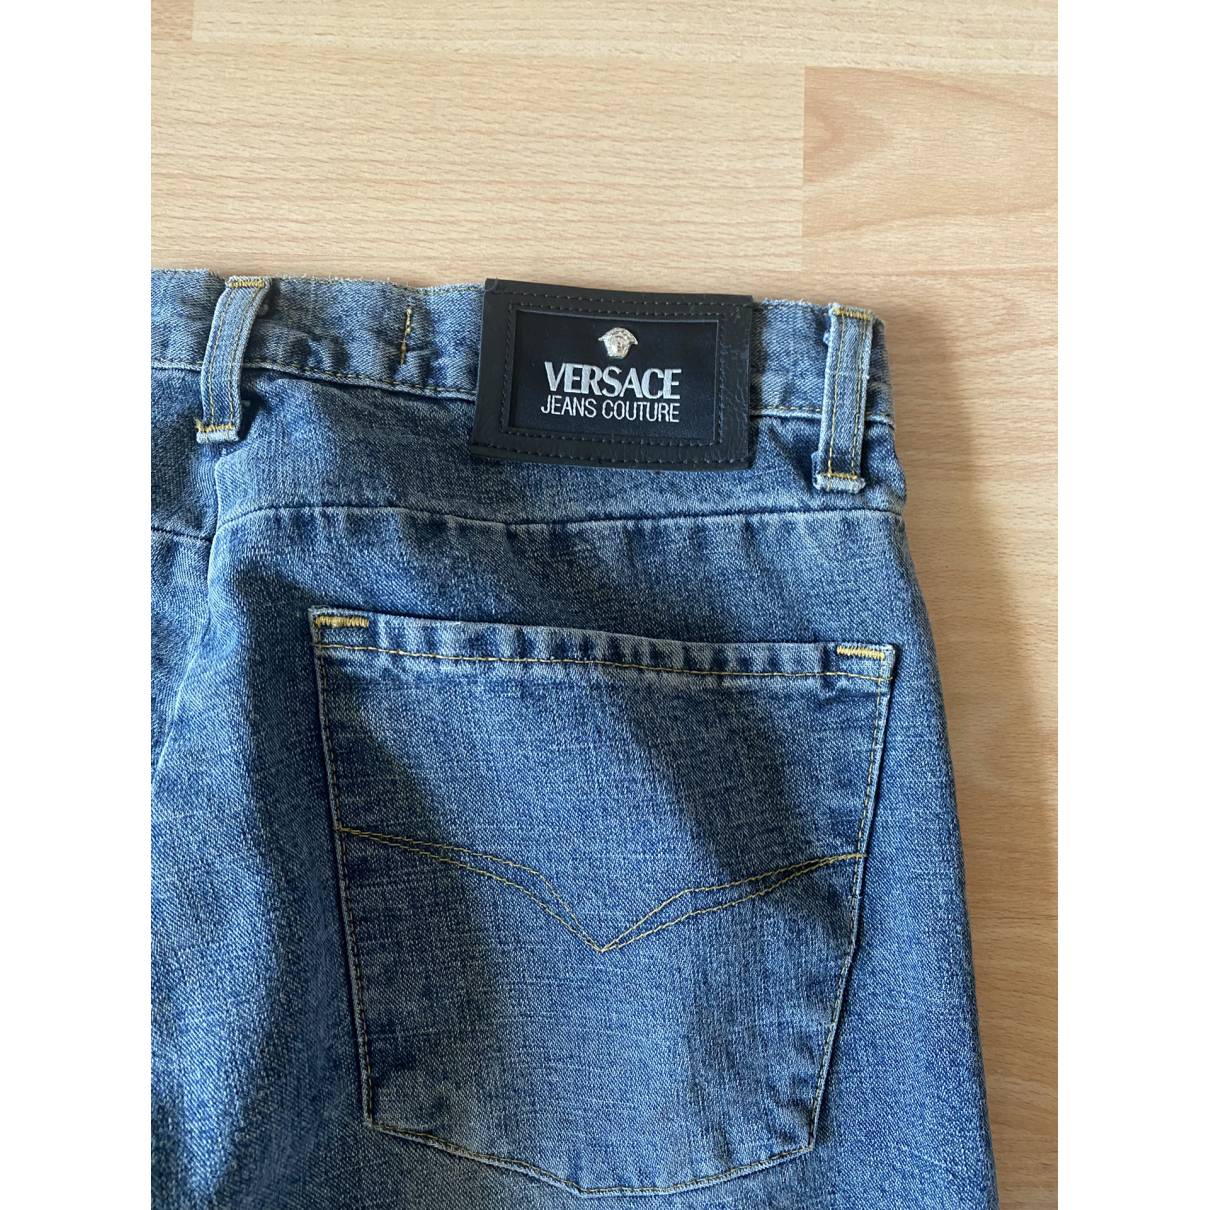 Buy Versace Jeans Couture Straight jeans online - Vintage